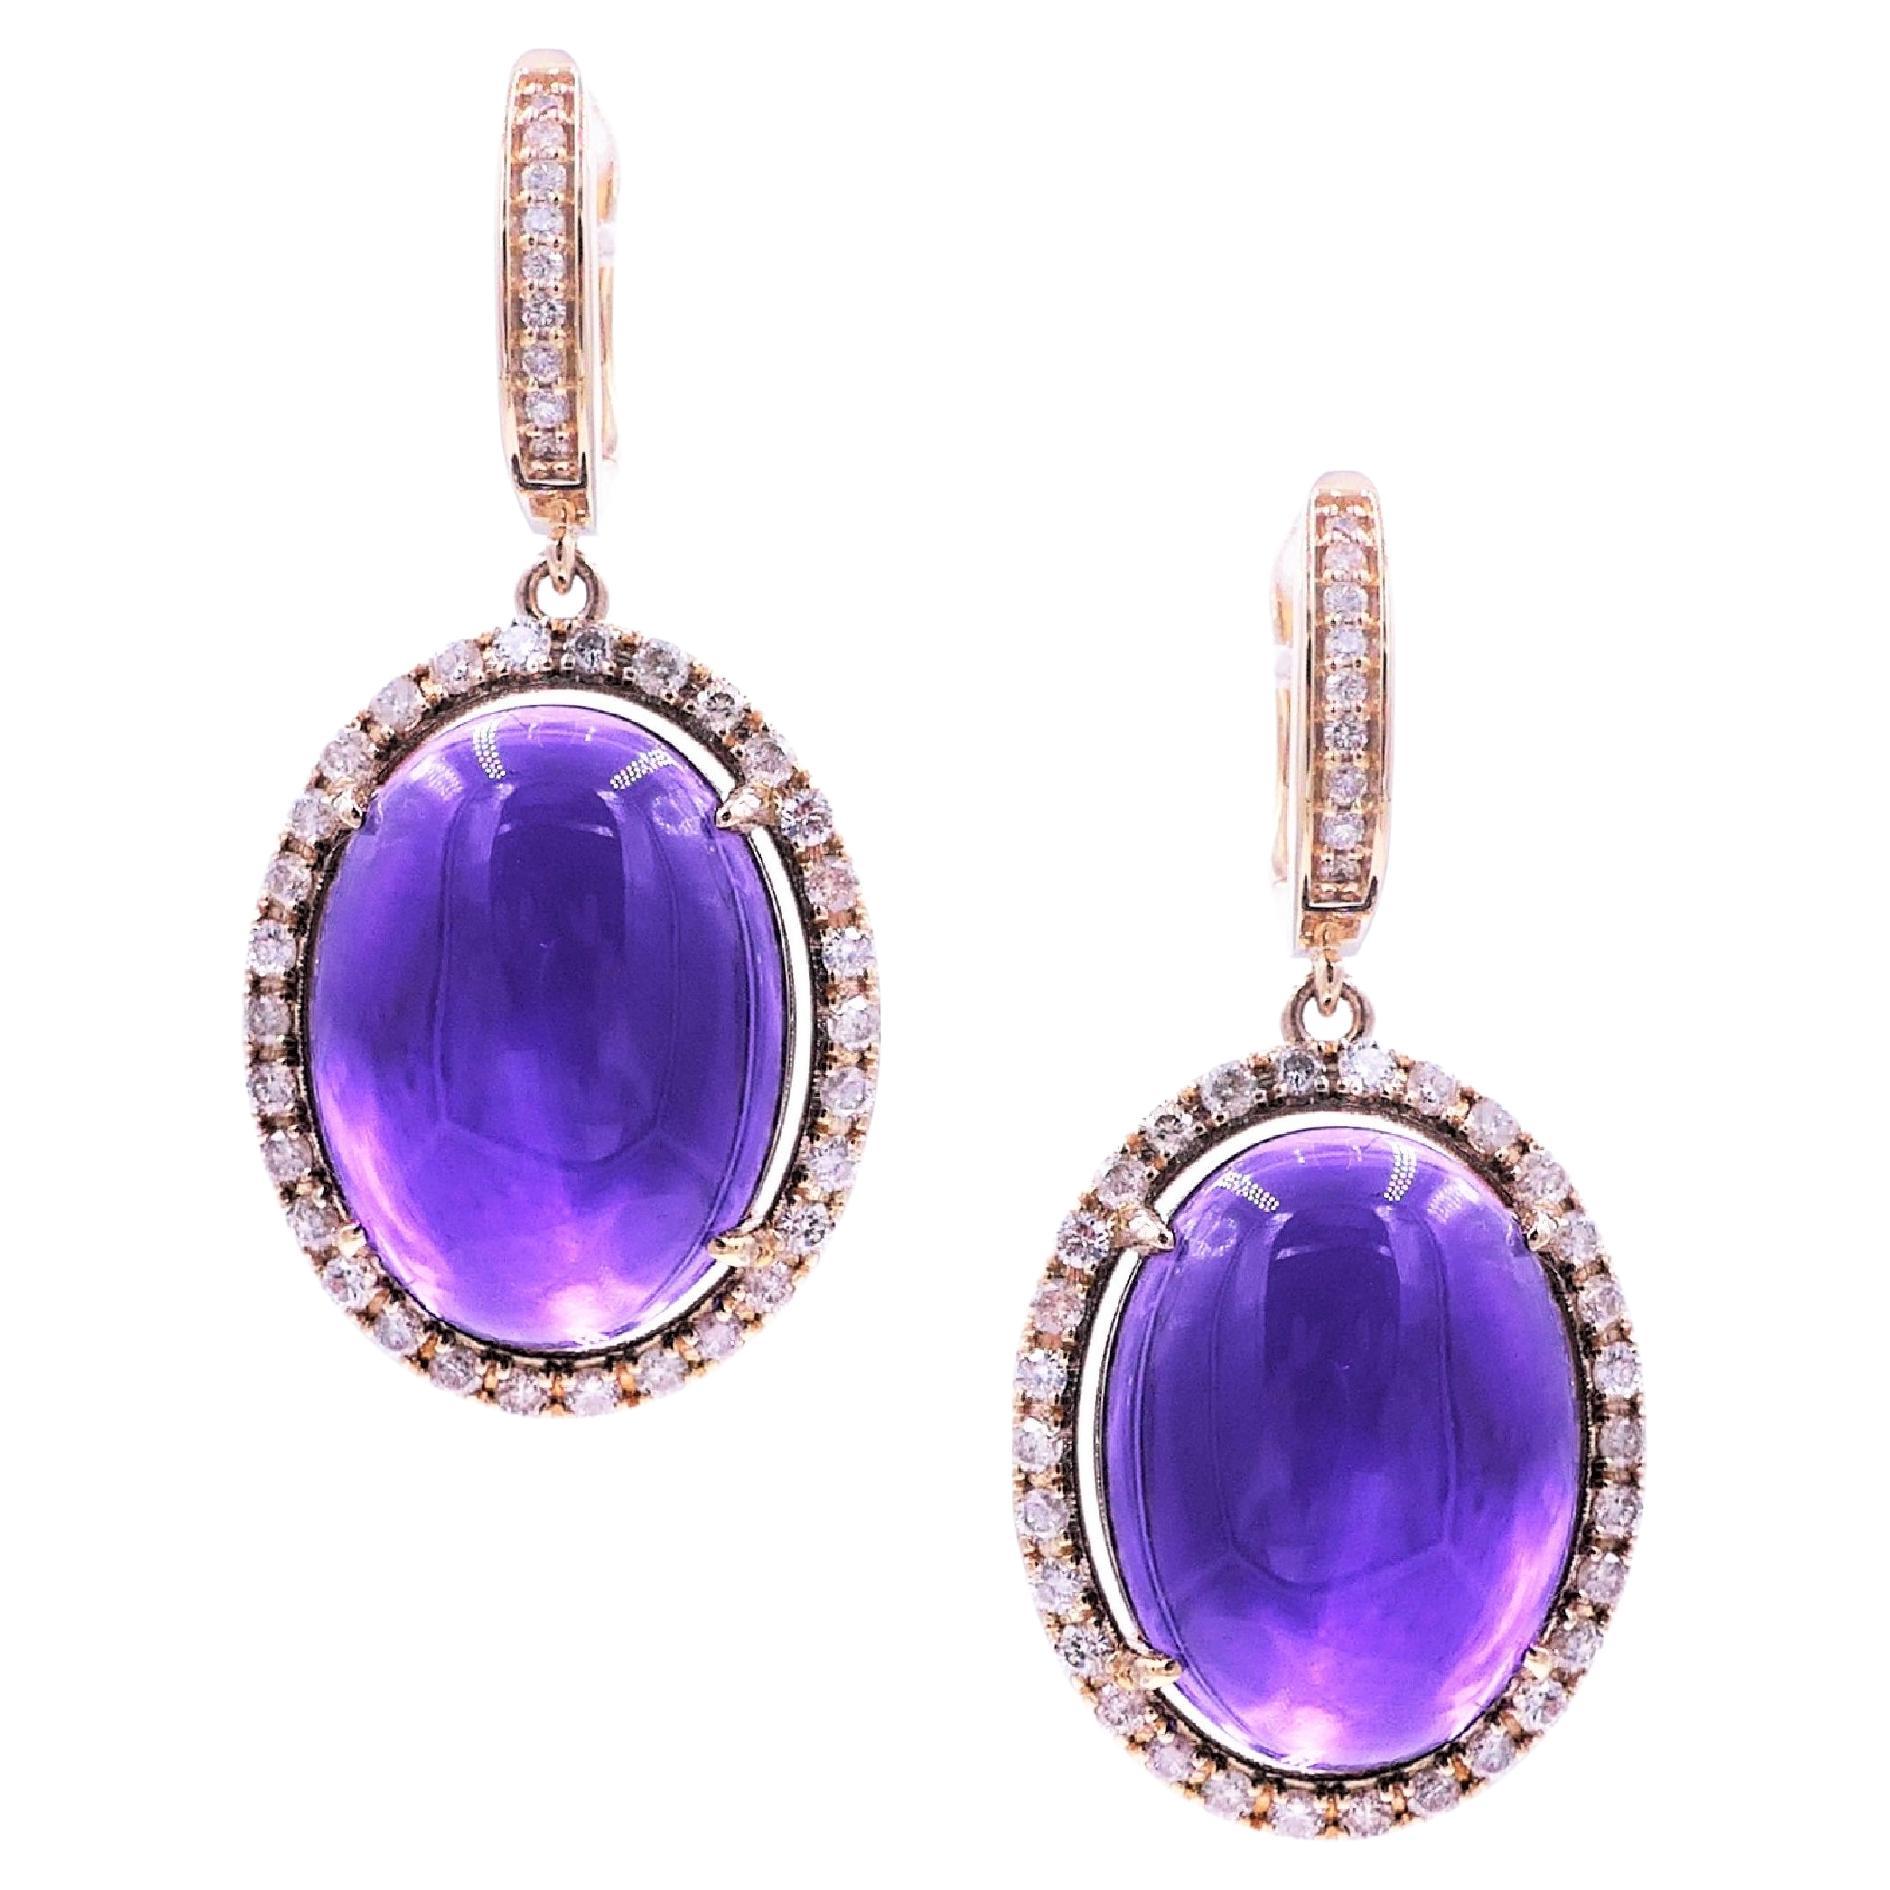 Purple Amethyst Oval Cabochon Diamond Halo 14K Yellow Gold Drop Huggie Earrings
14 Karat Yellow Gold
1.00 CT Diamonds
Purple Amethyst Oval Cabochons

Important Information:
Please note that this item will take 2-4 weeks to deliver - it is showcased